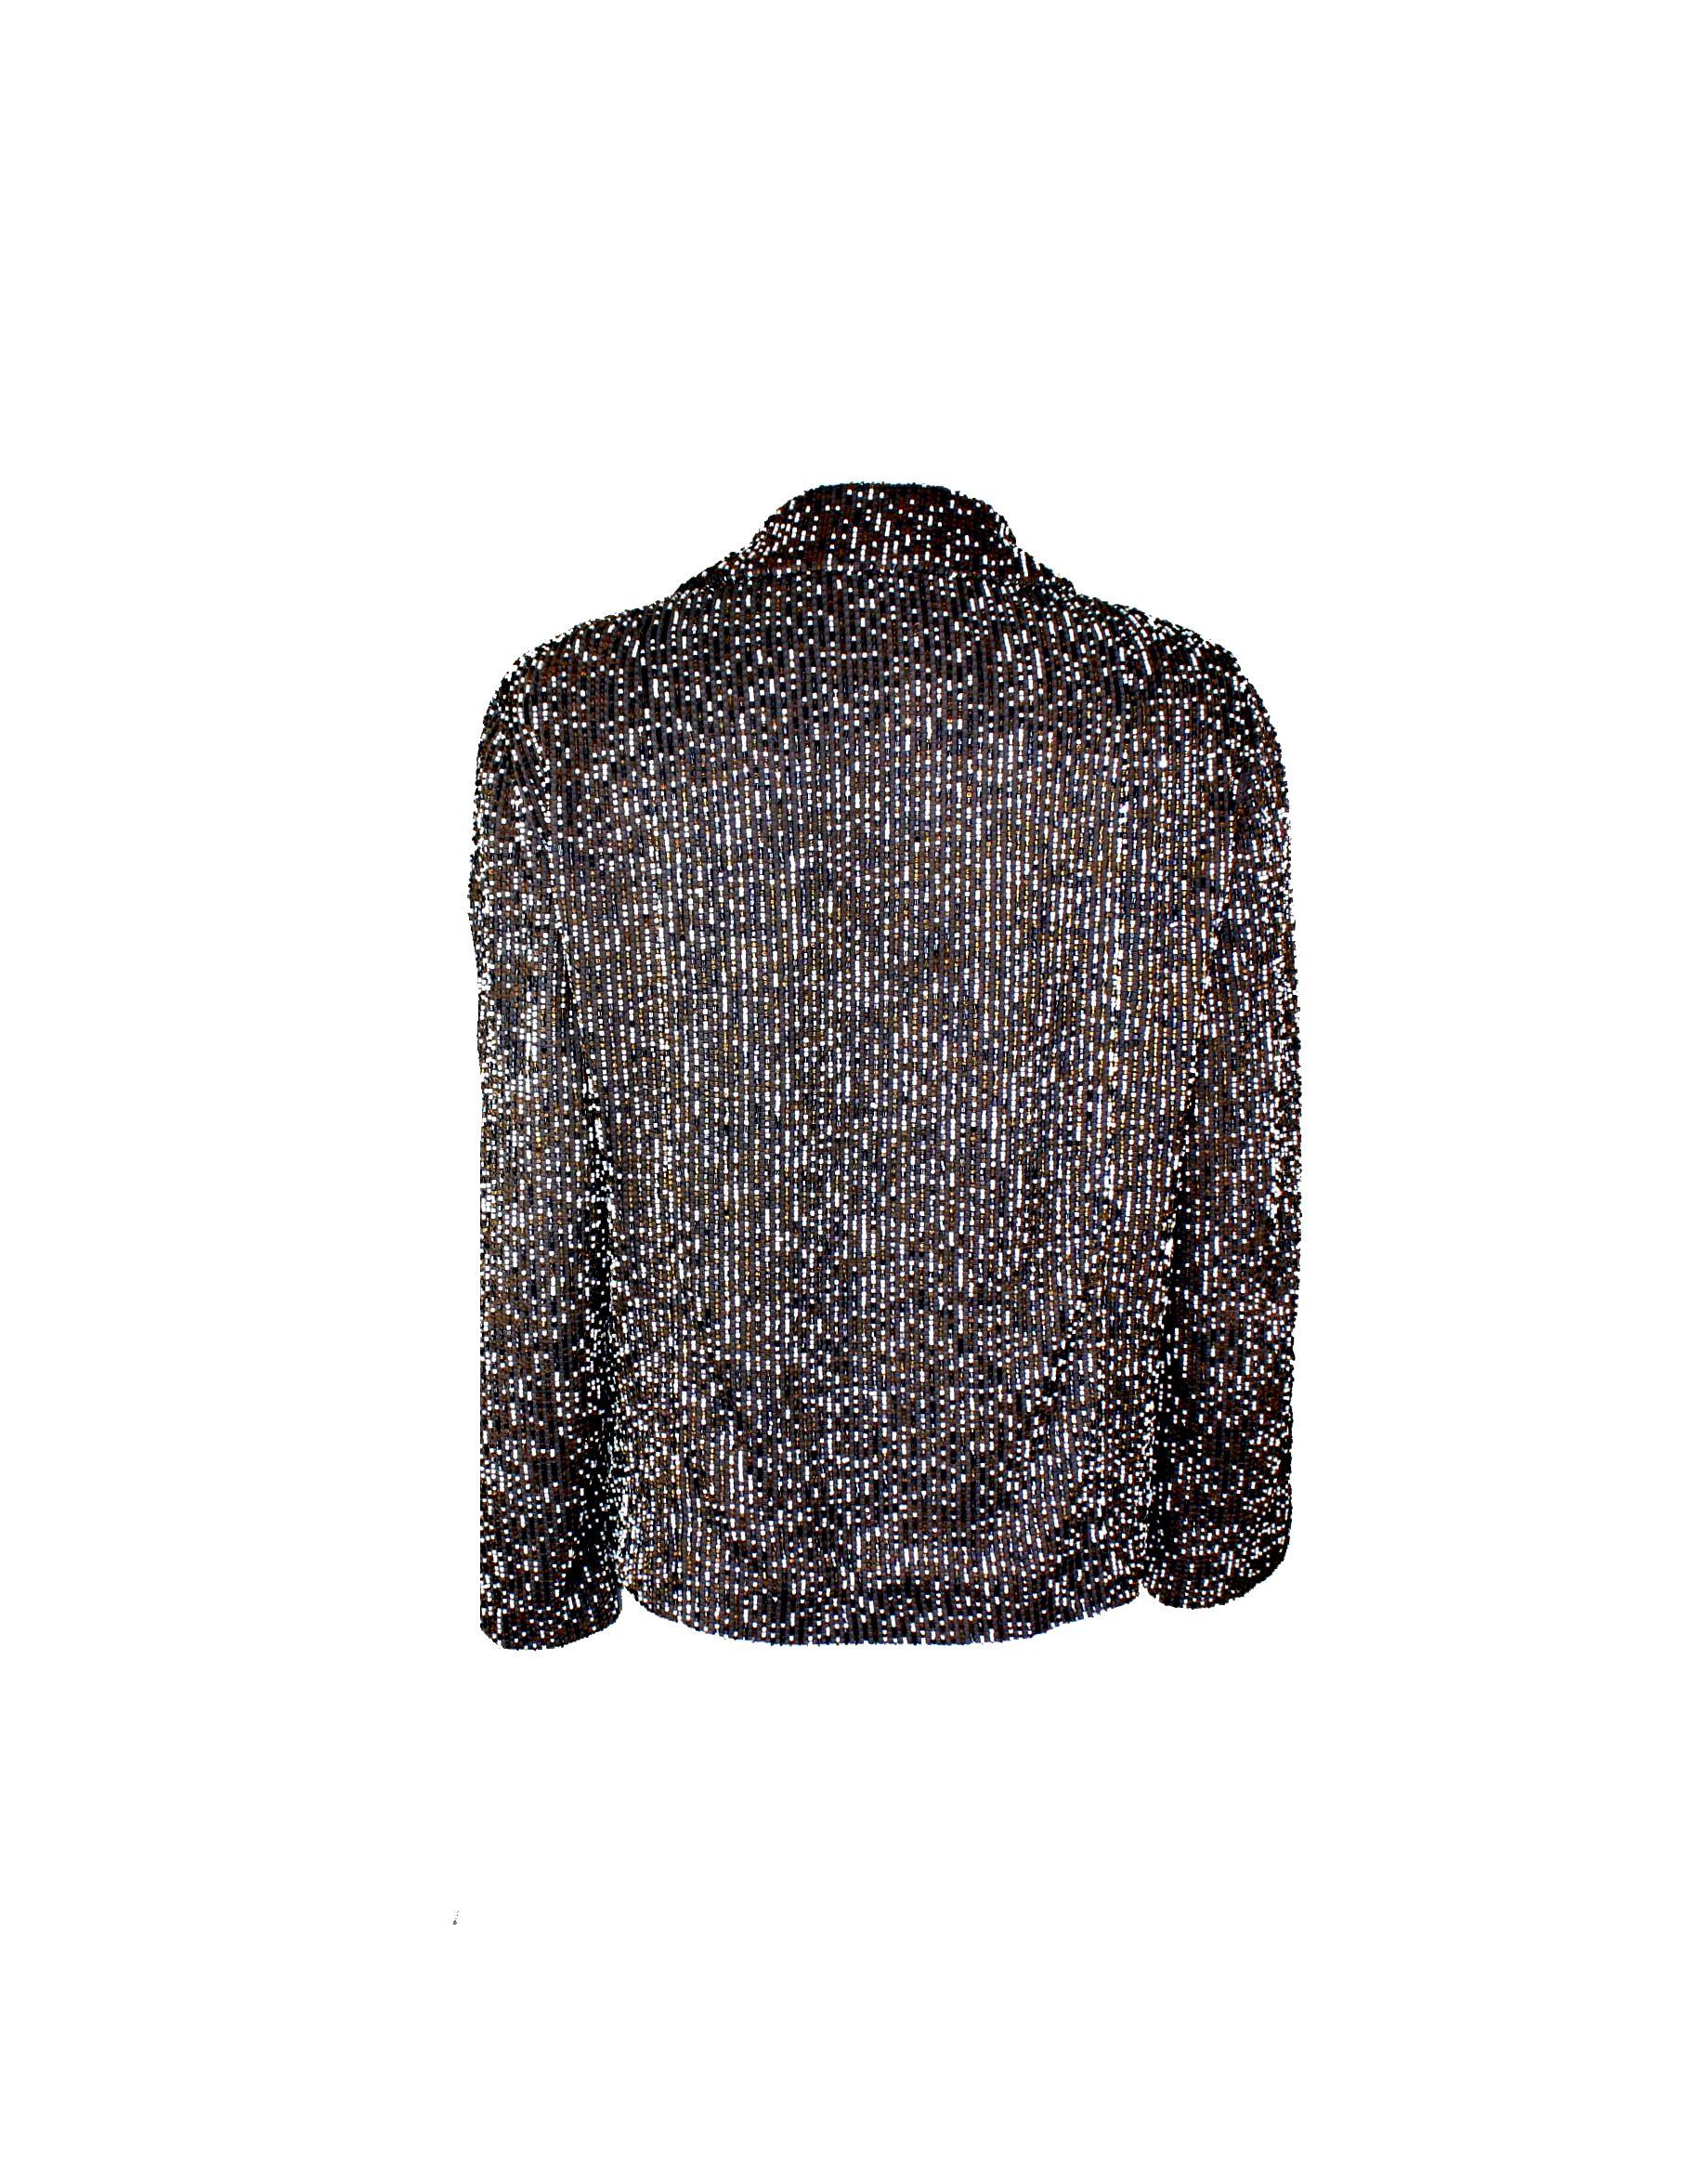 Luxurious Chanel evening jacket
A true CHANEL signature item that will last you for many years
Stunning piece
Hand-embroidered in Chanel's Atelier with many small pearl bead - just like Haute Couture
Fully lined with finest CC logo silk
Two front